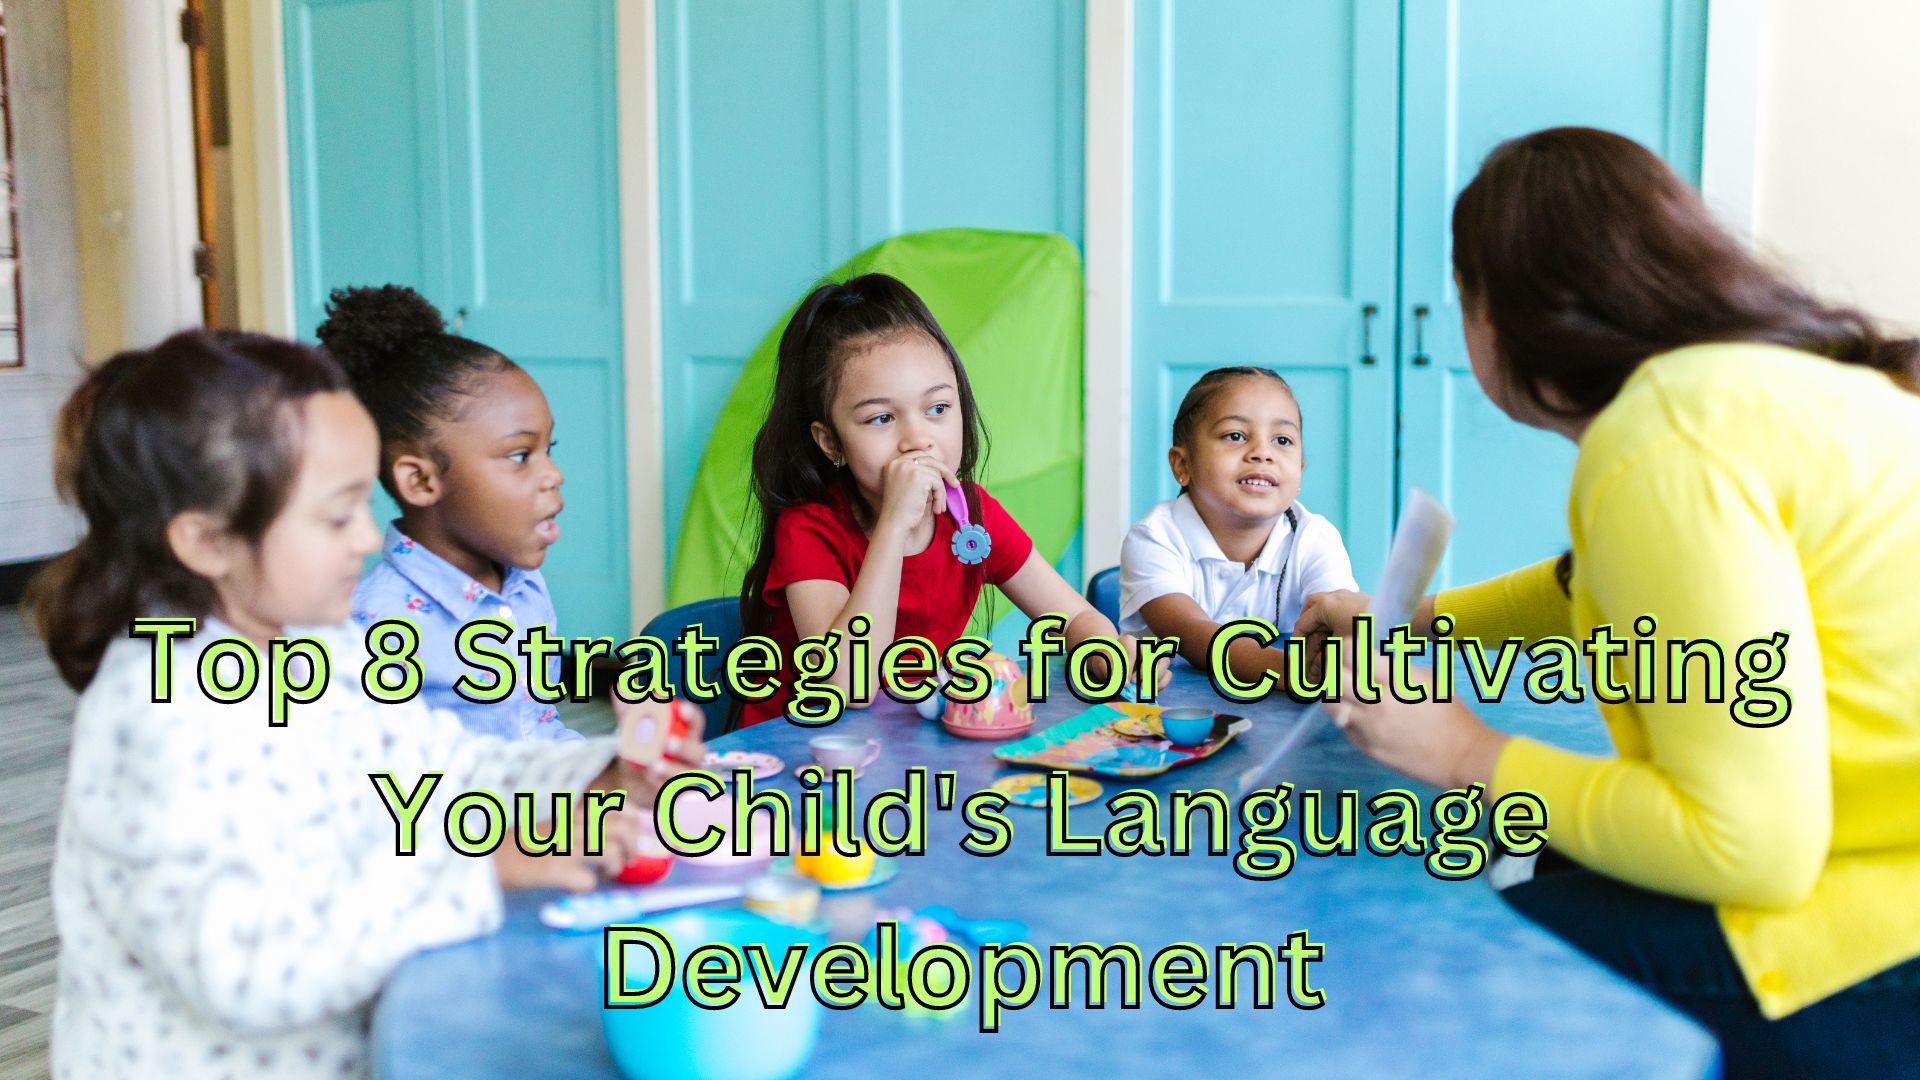 Top 8 Strategies for Cultivating Your Child's Language Development